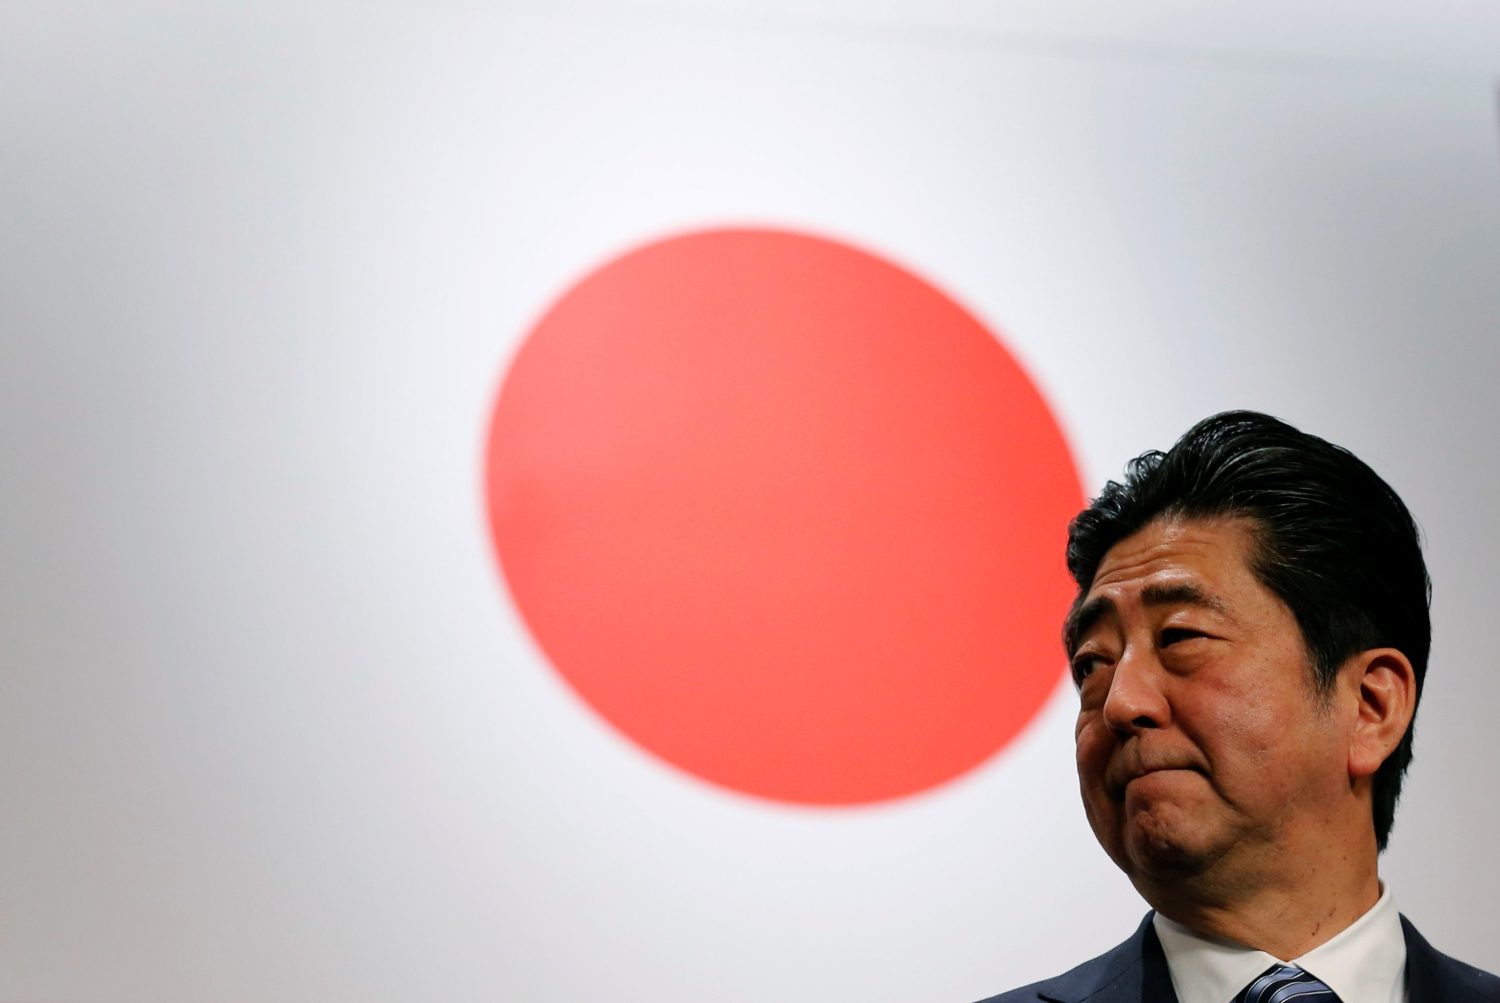 Japan's Prime Minister Shinzo Abe stands in front of Japan's national flag after his ruling Liberal Democratic Party's (LDP) annual party convention in Tokyo, Japan, March 5, 2017.  REUTERS/Toru Hanai - RC1EEE131EC0